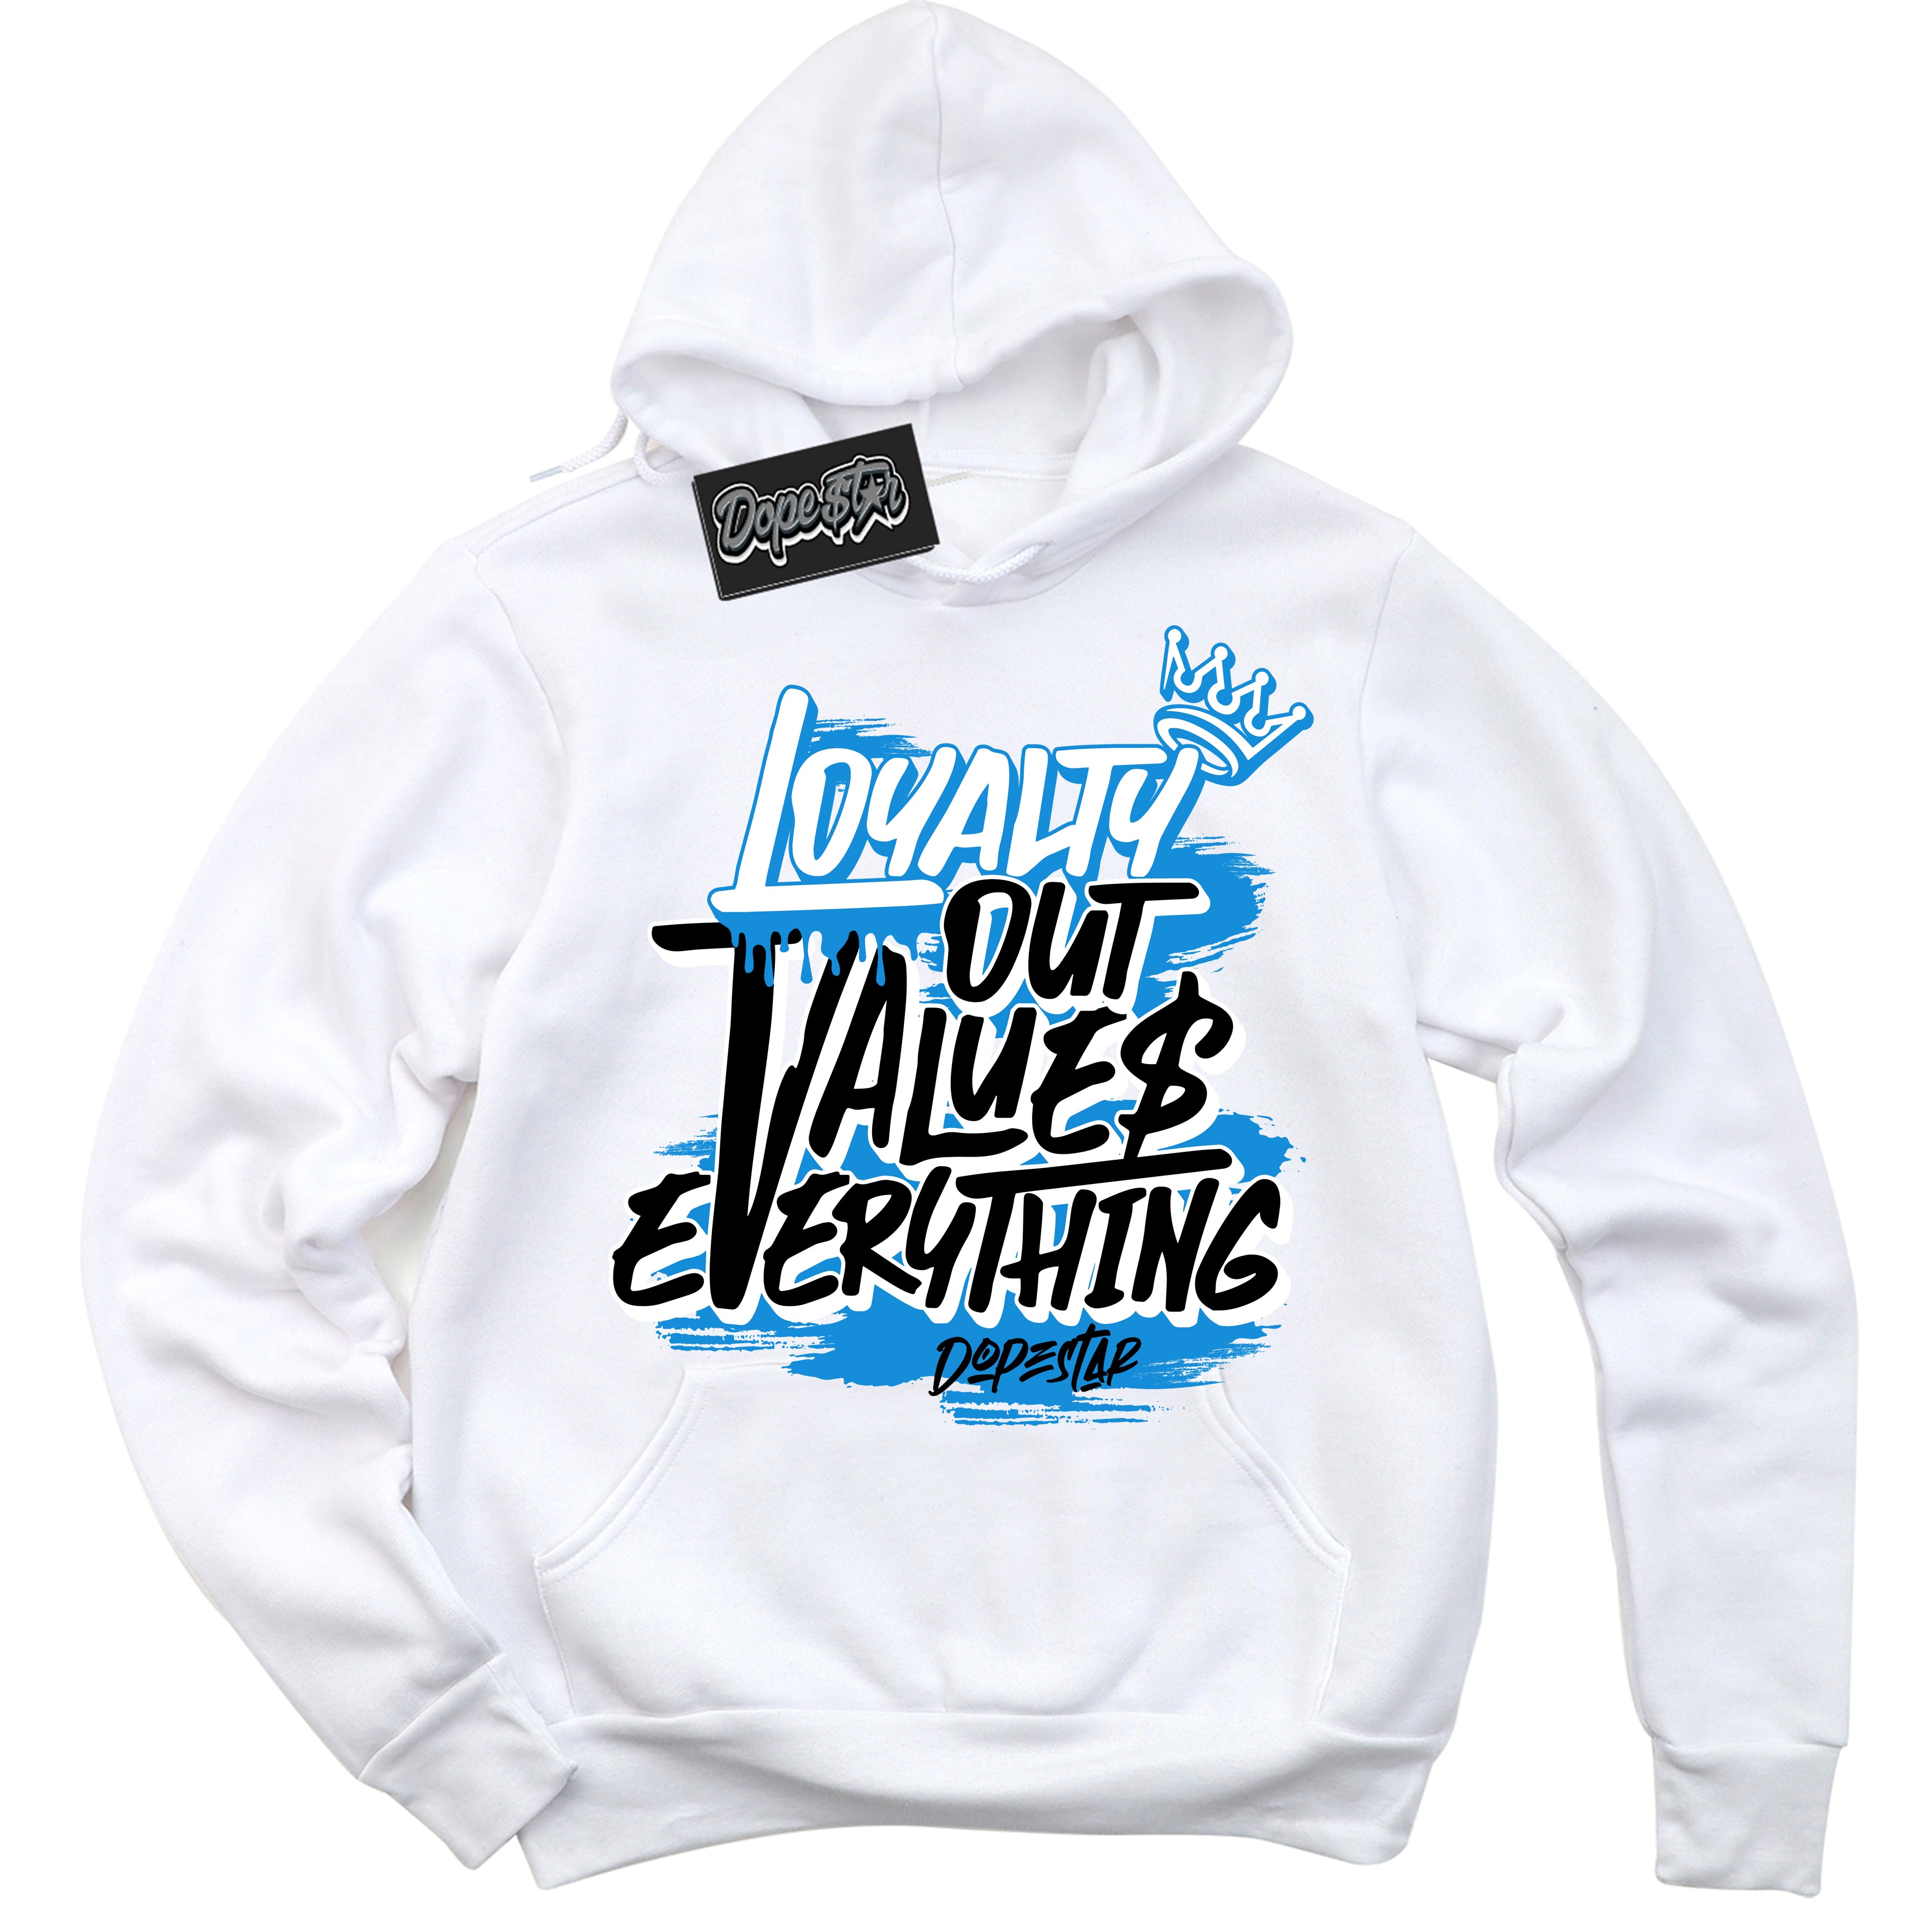 Cool White Hoodie with “ Loyalty Out Values Everything ”  design that Perfectly Matches Powder Blue 9s Sneakers.